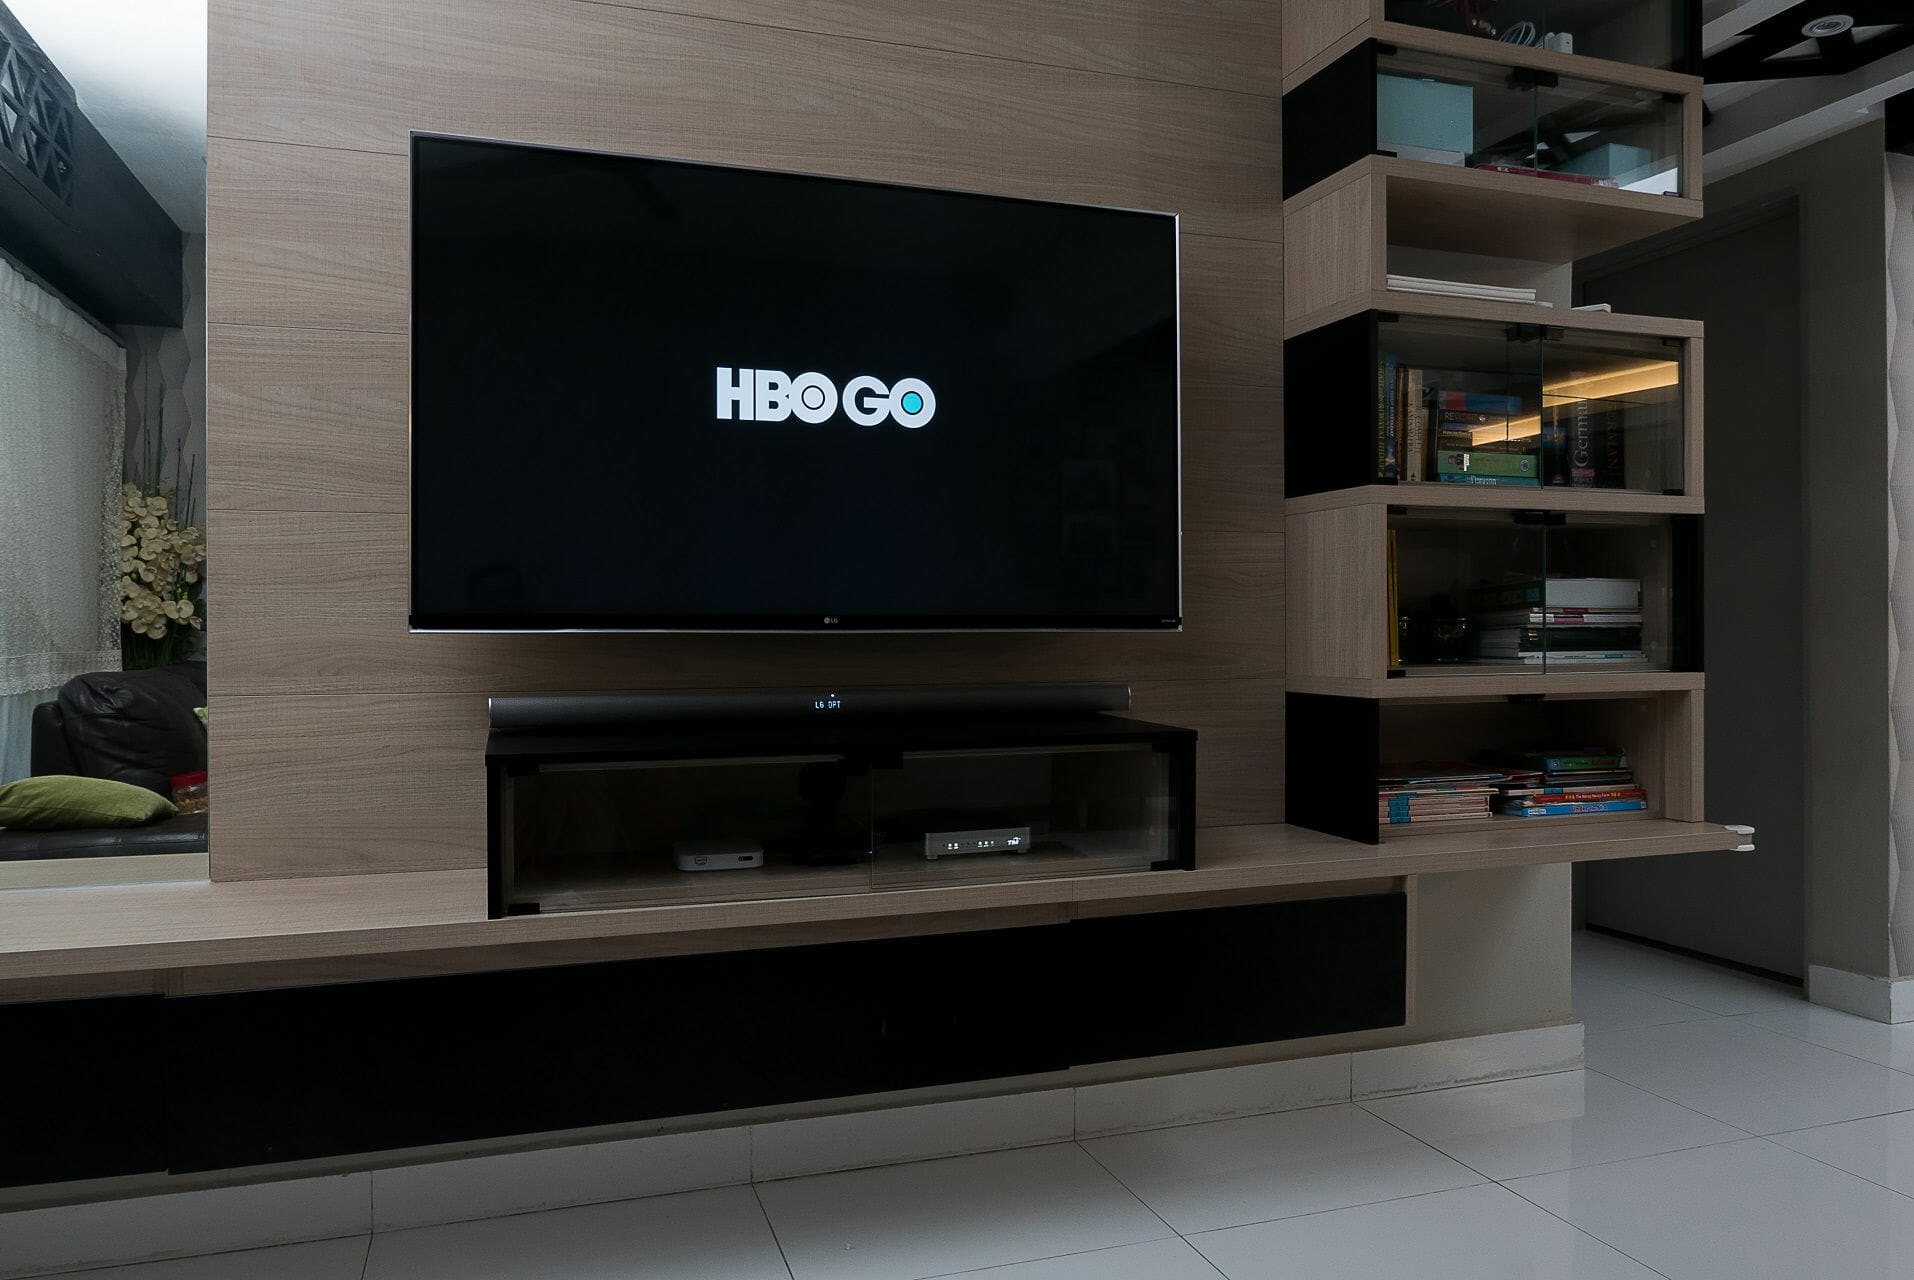 Best web browsers to watch HBO GO on